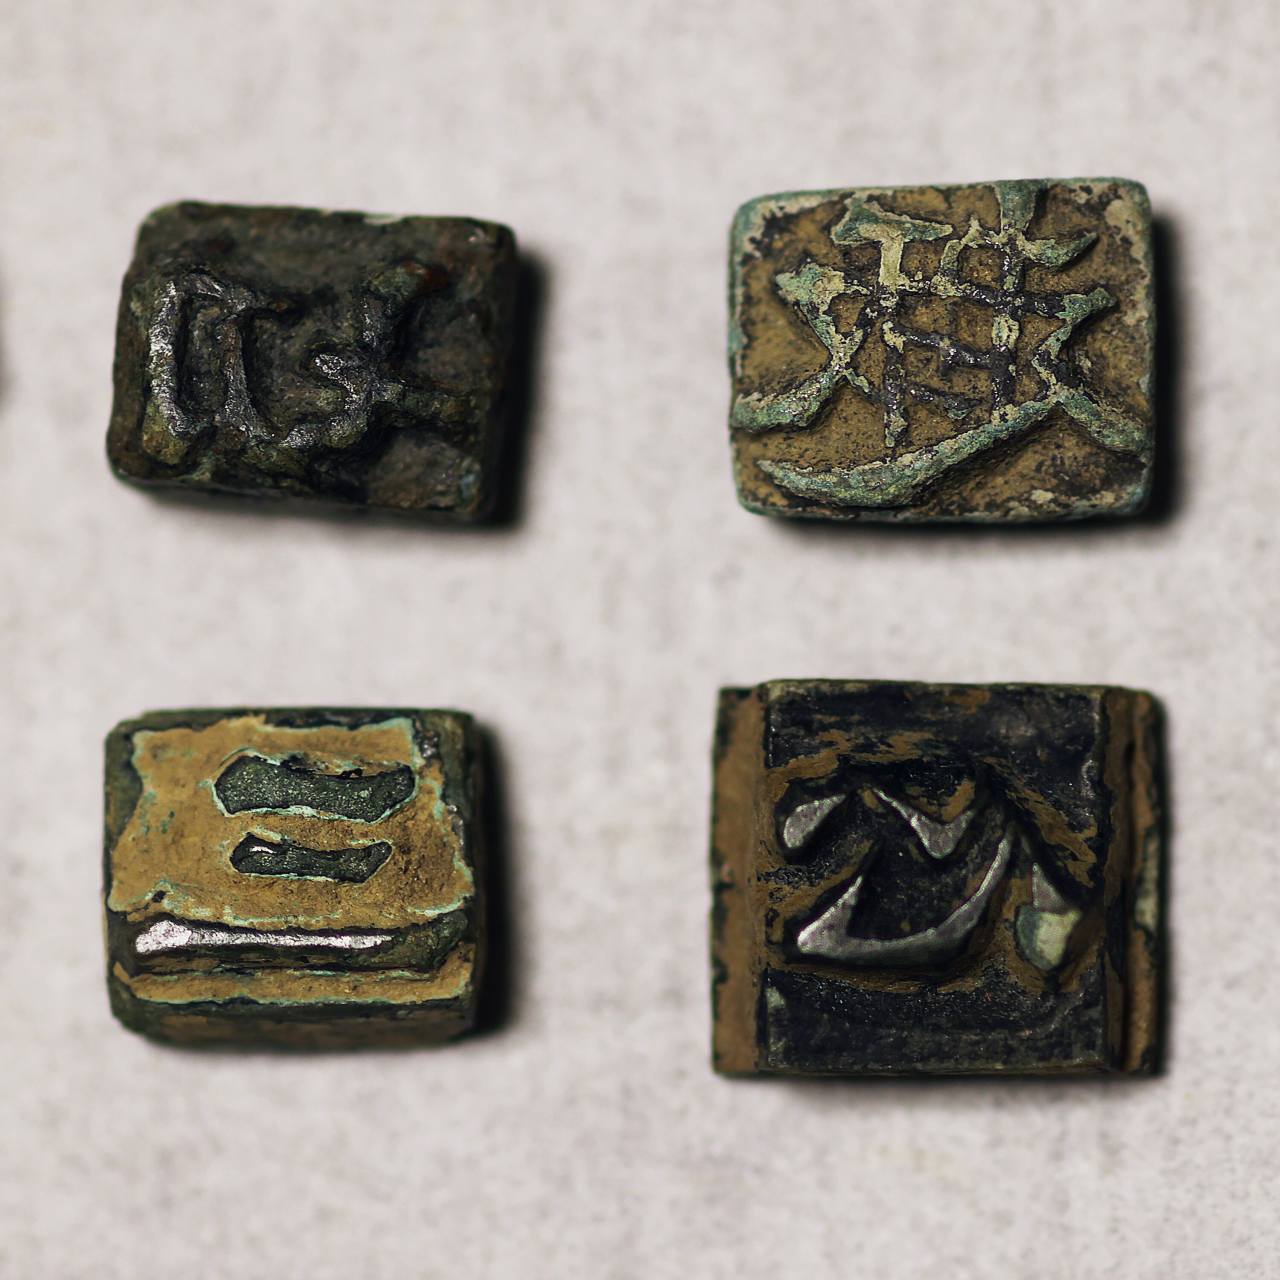 A collection of Jeungdoga Goryeo movable metal printing type from Manwoldae in Kaesong is photographed with permission from Kim Byung-gu’s collection in Daegu. (Hyungwon Kang)